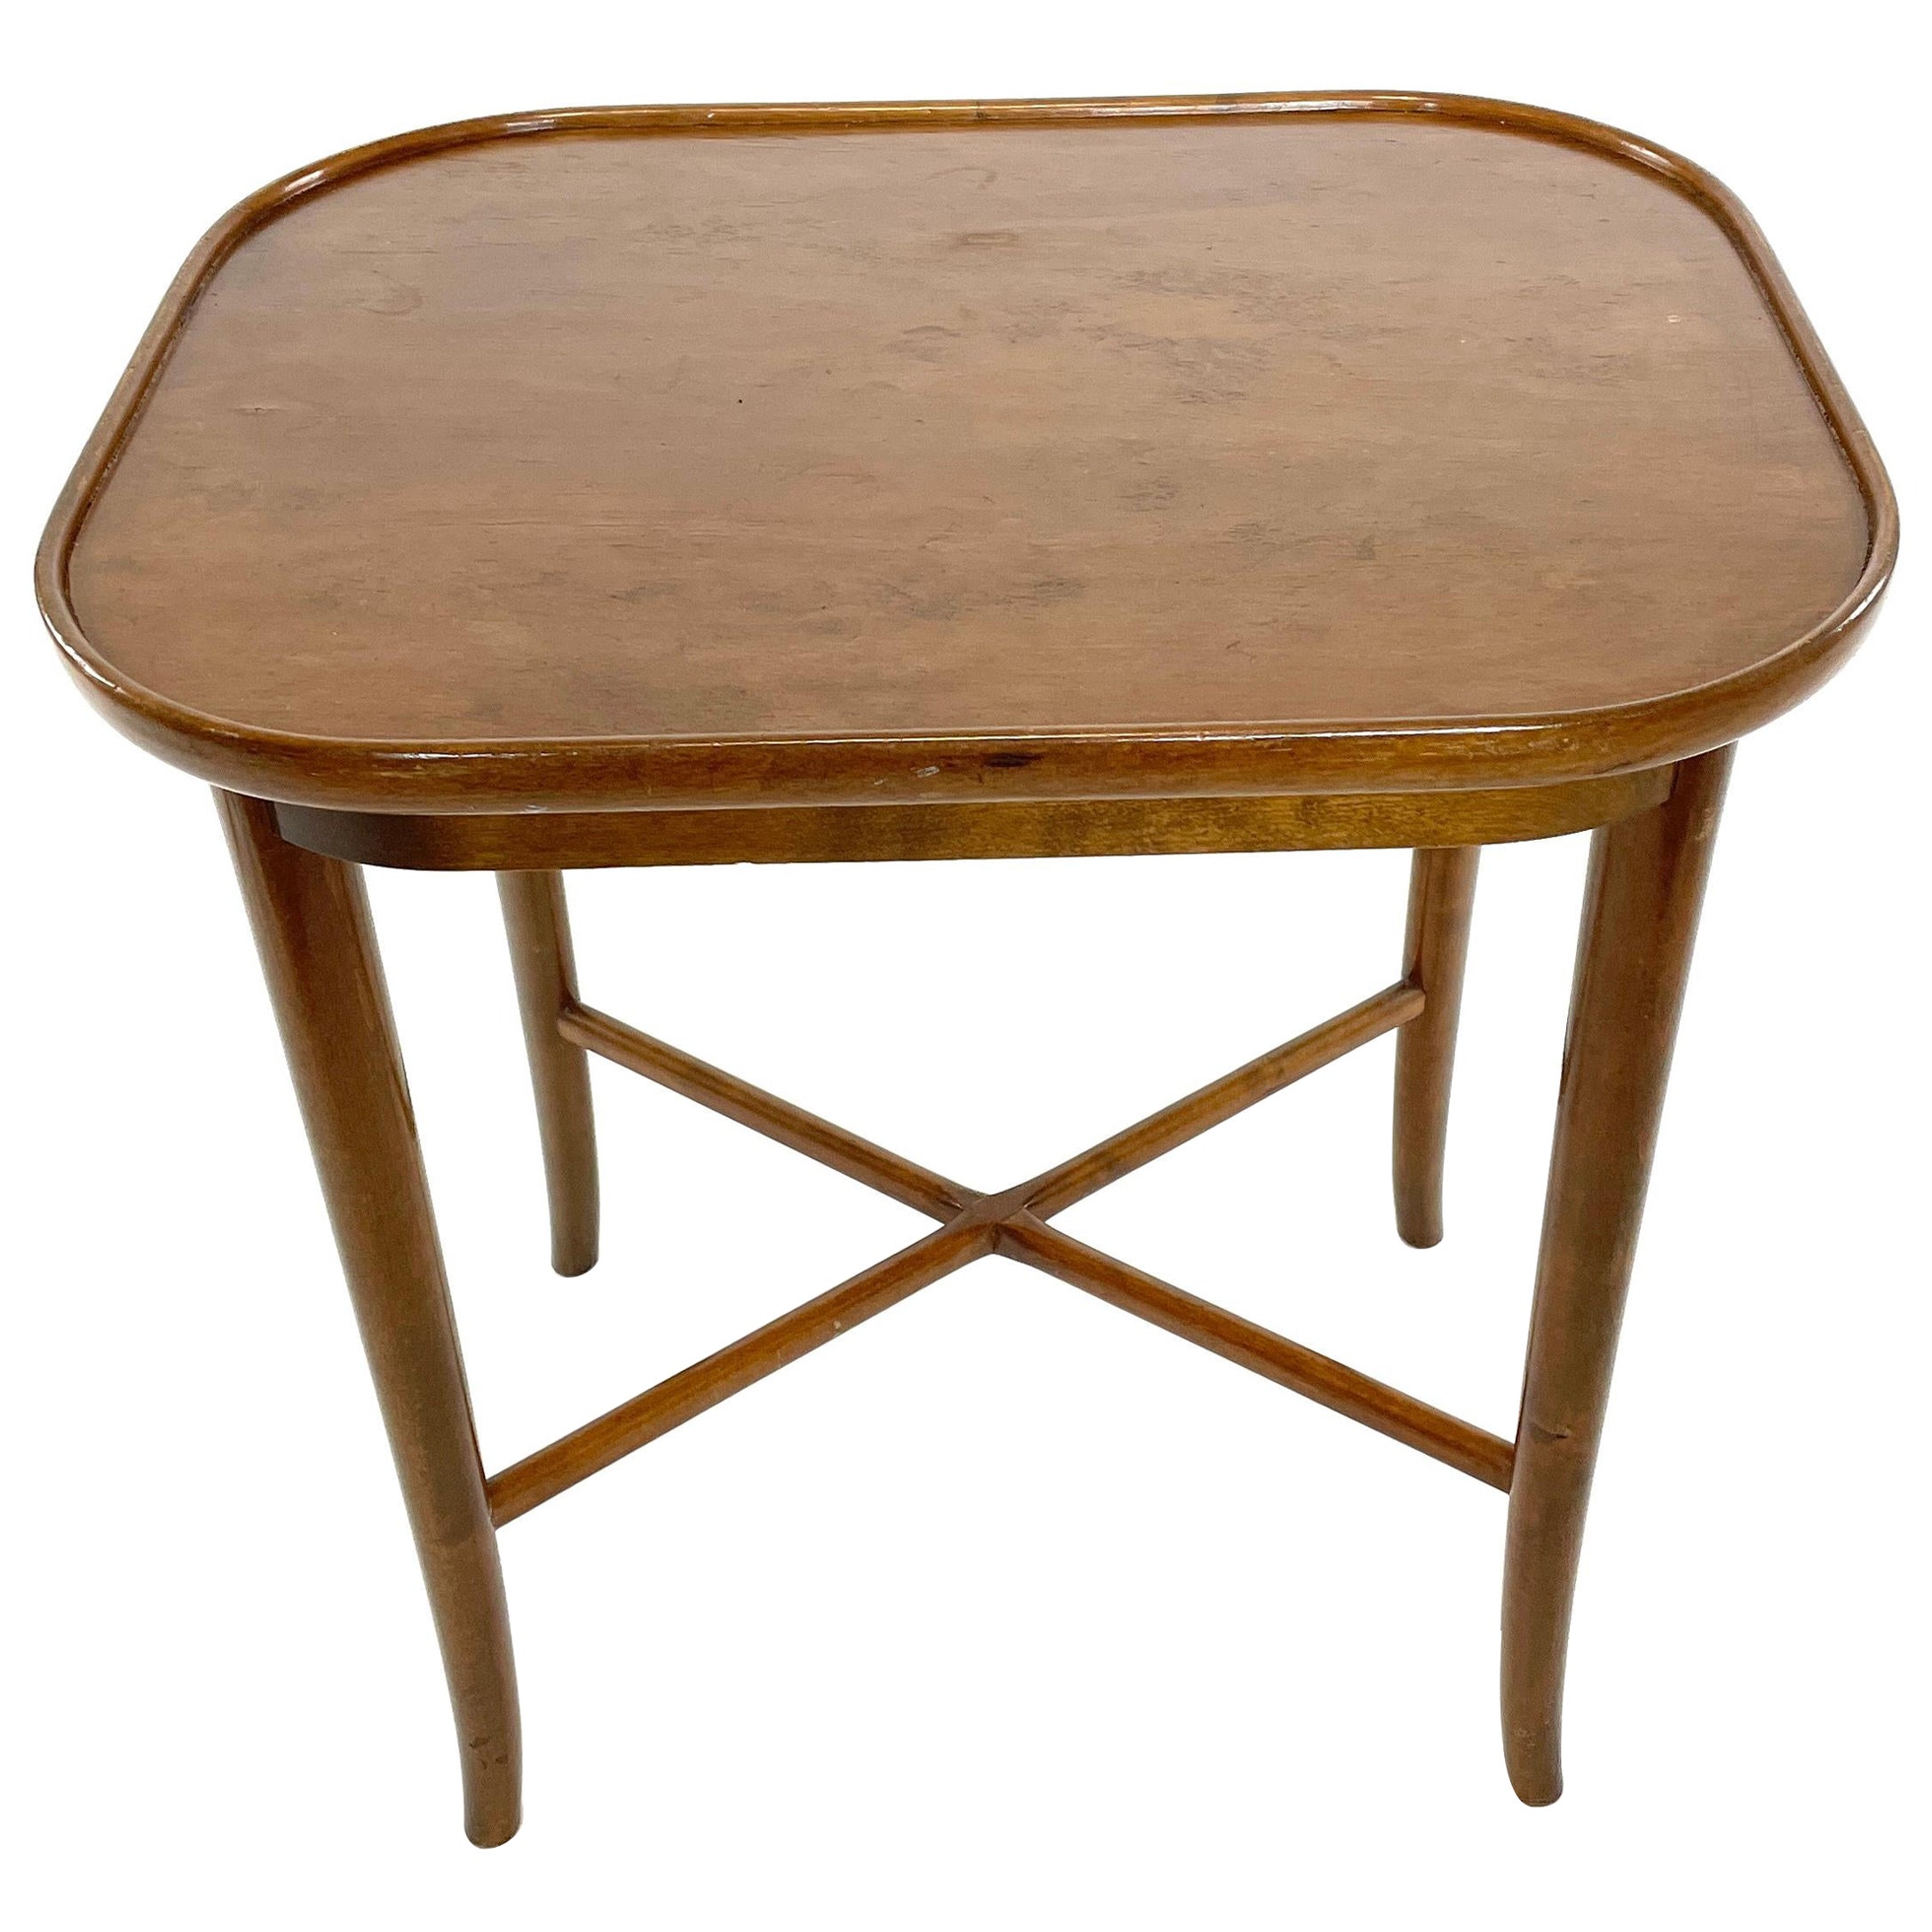 Mid-century Modern Side Table by Carl-Johan Boman, Finland, 1940s For Sale